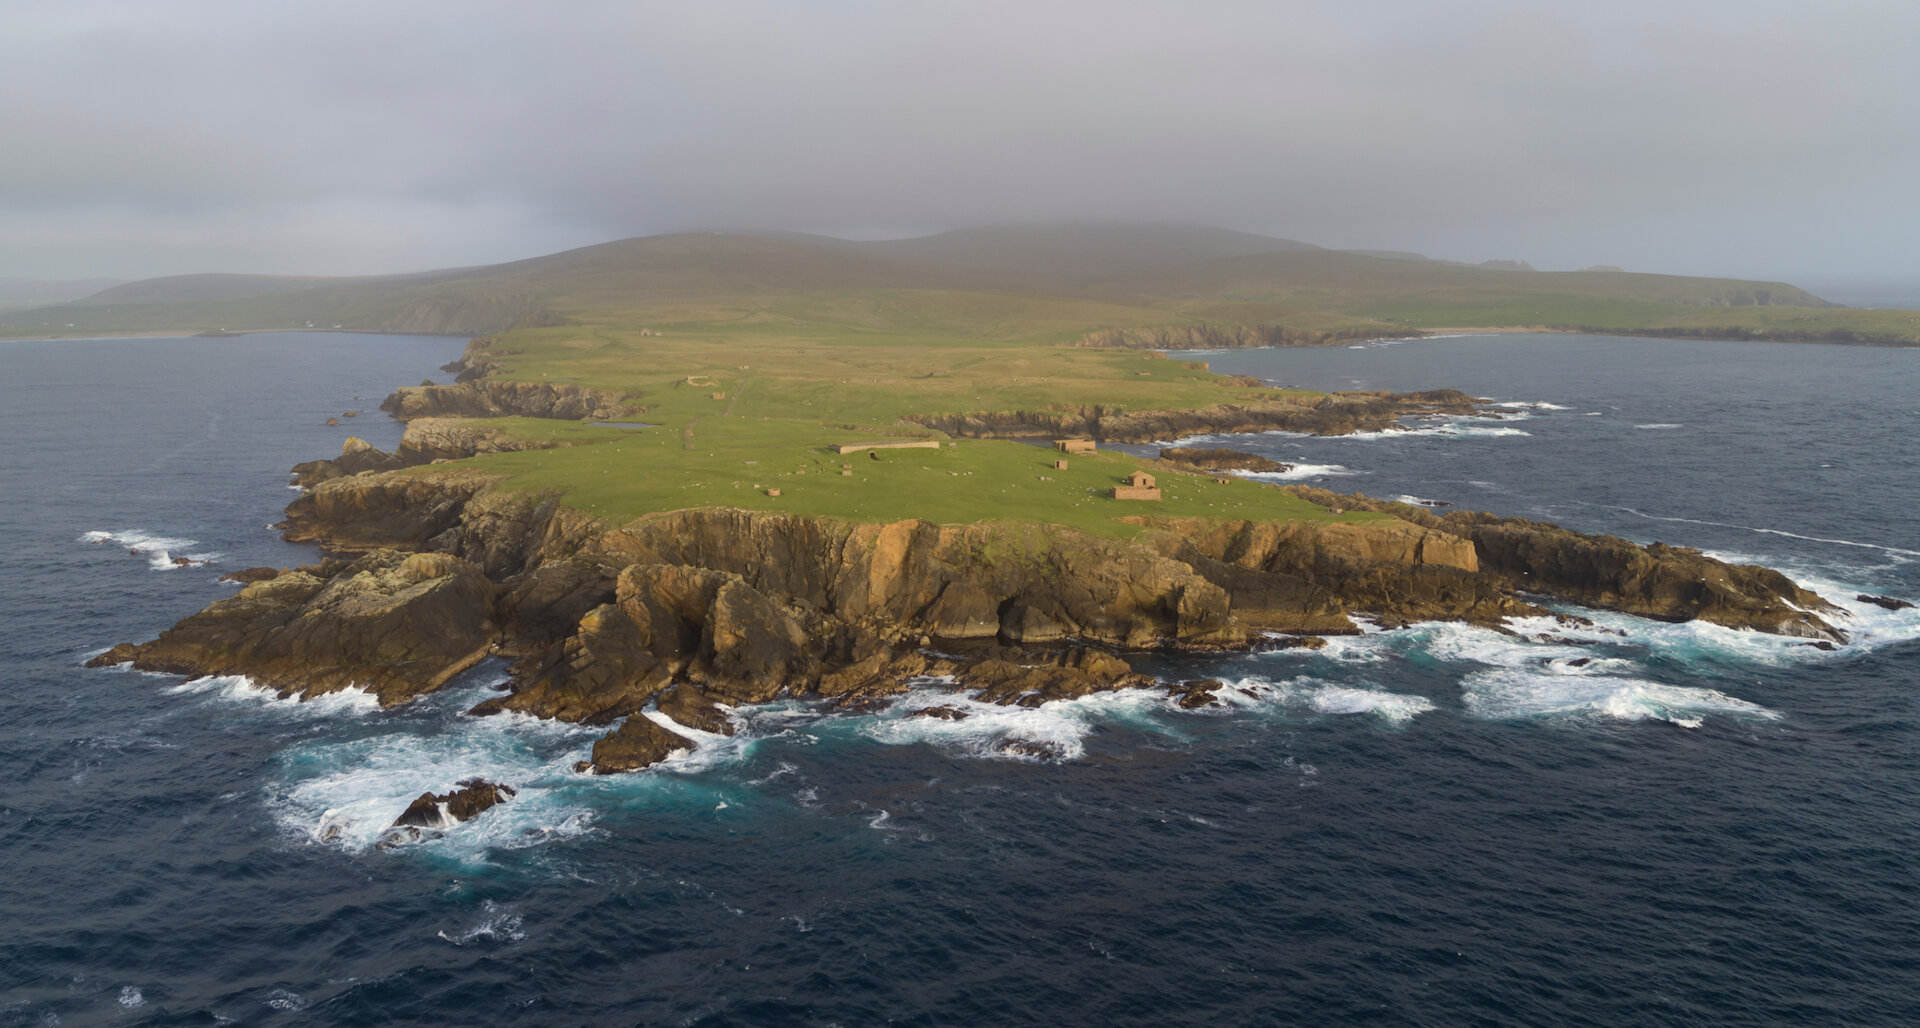 The site of the proposed Shetland Space Centre